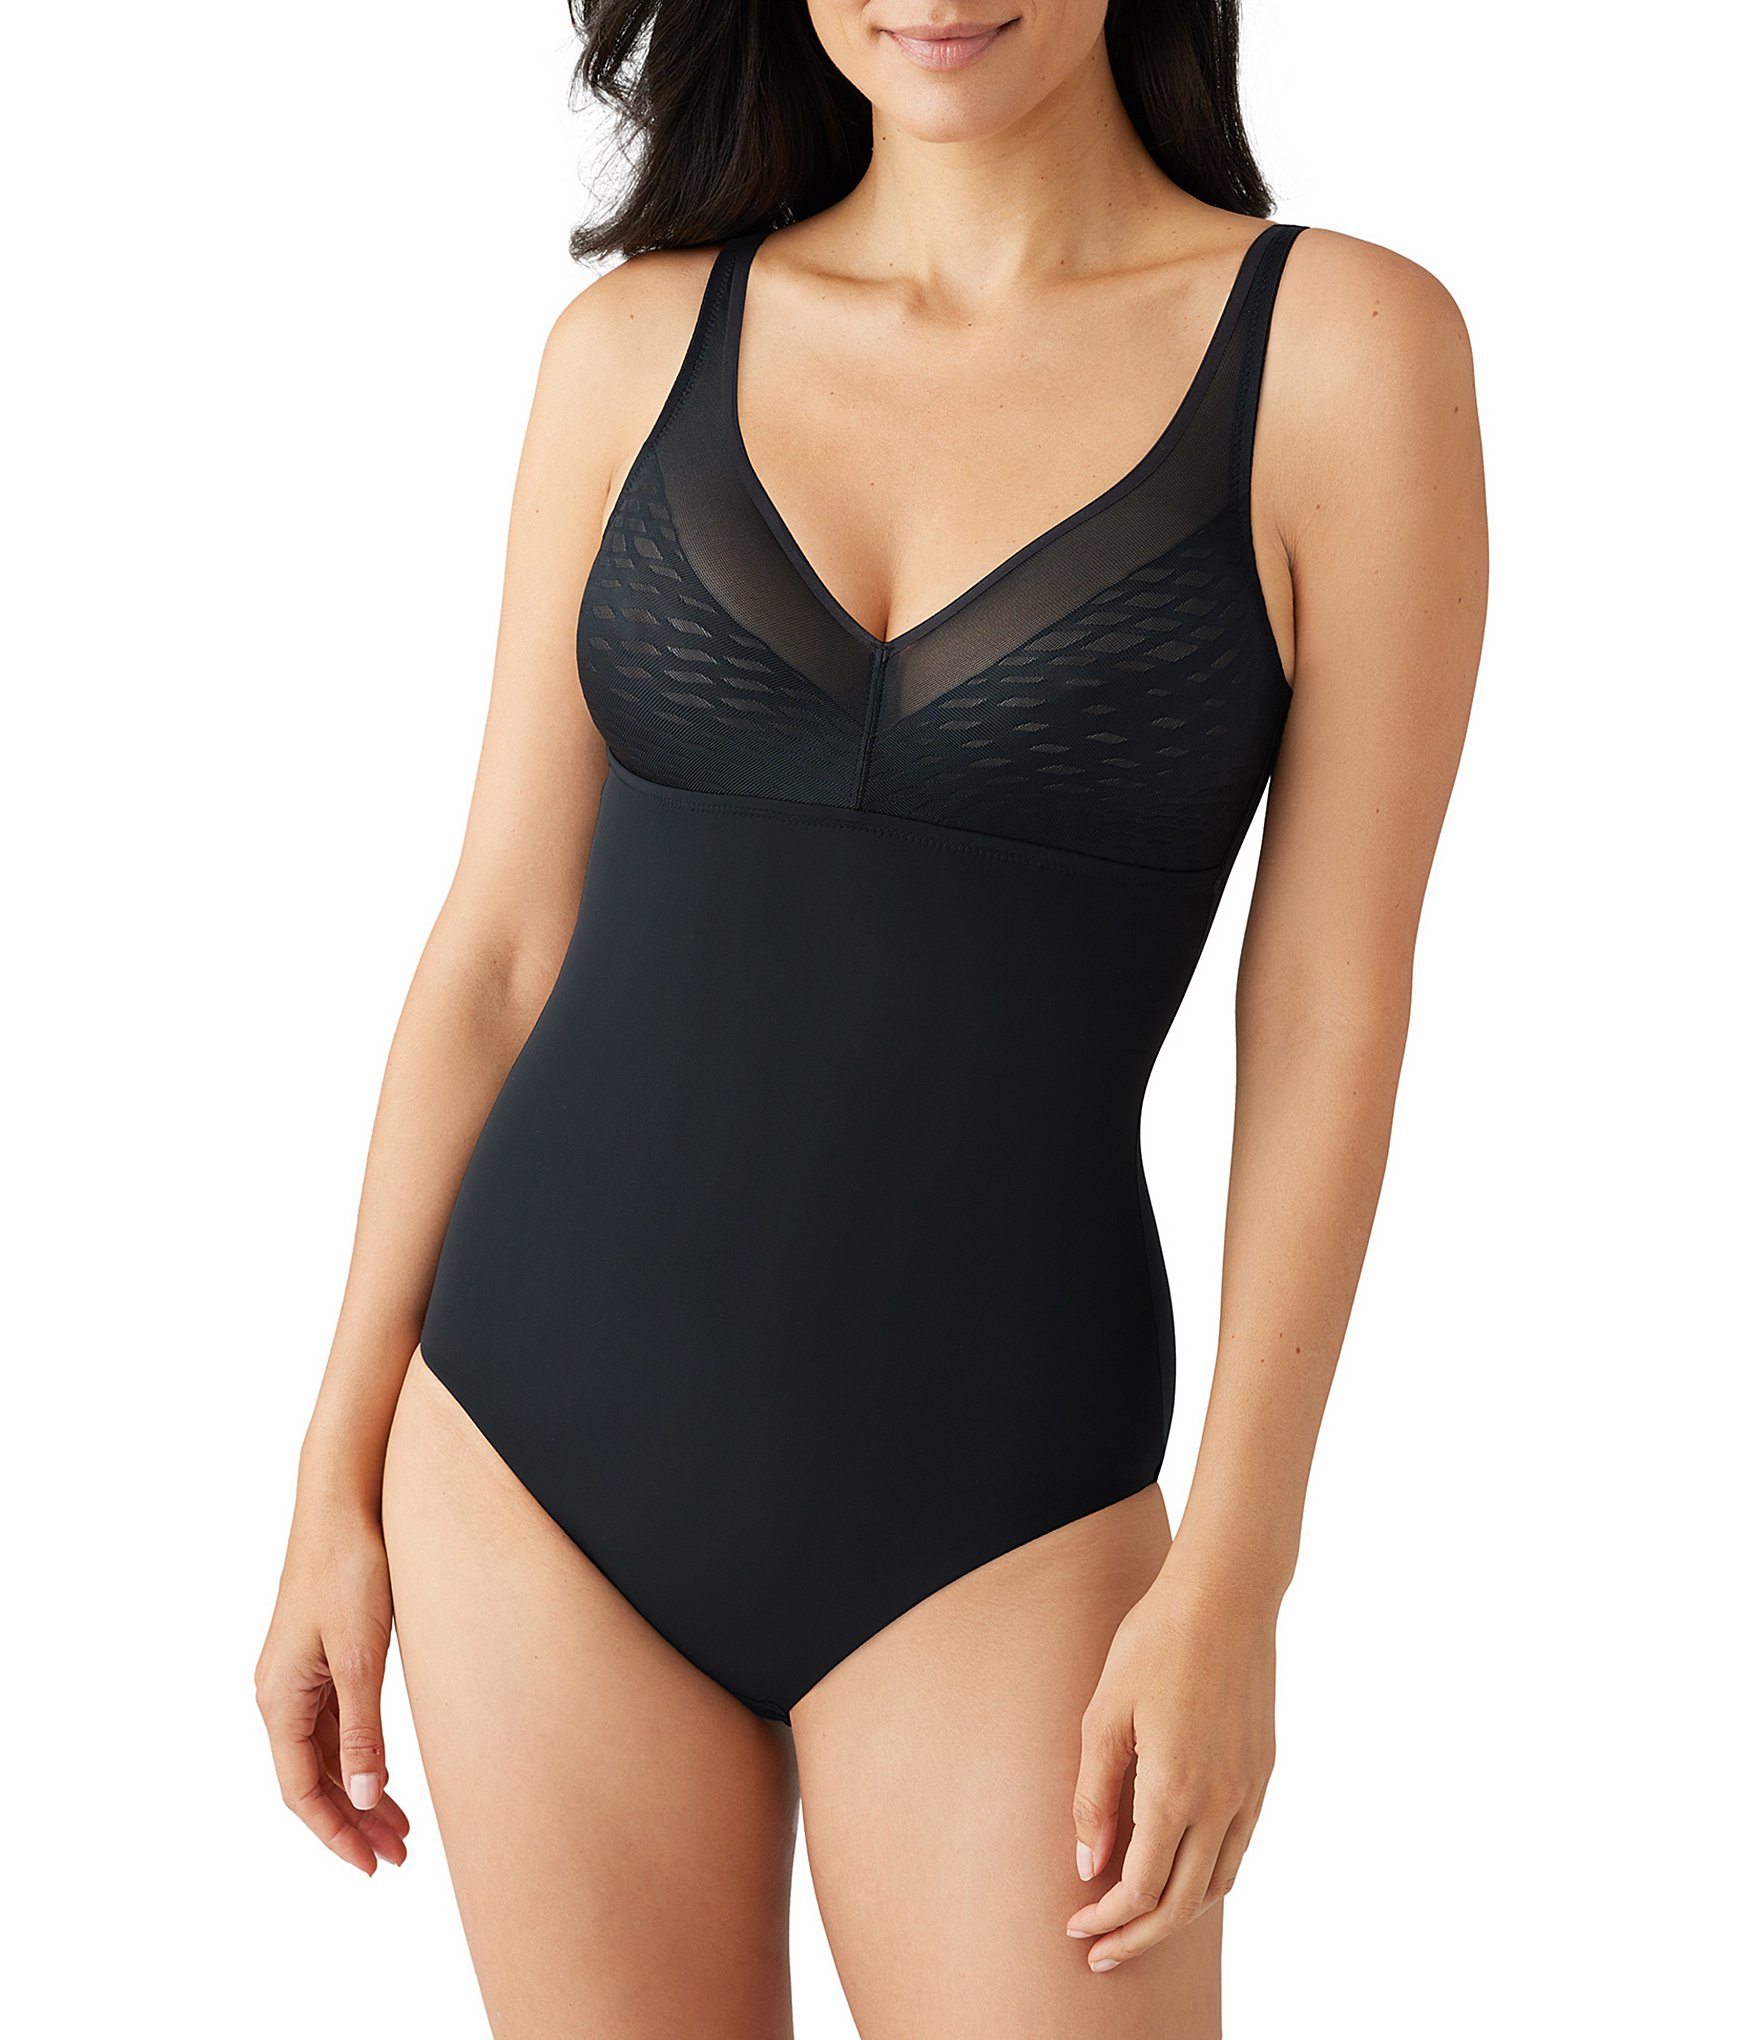  Ailezt Womens Body Briefer Smooth Wear Womens